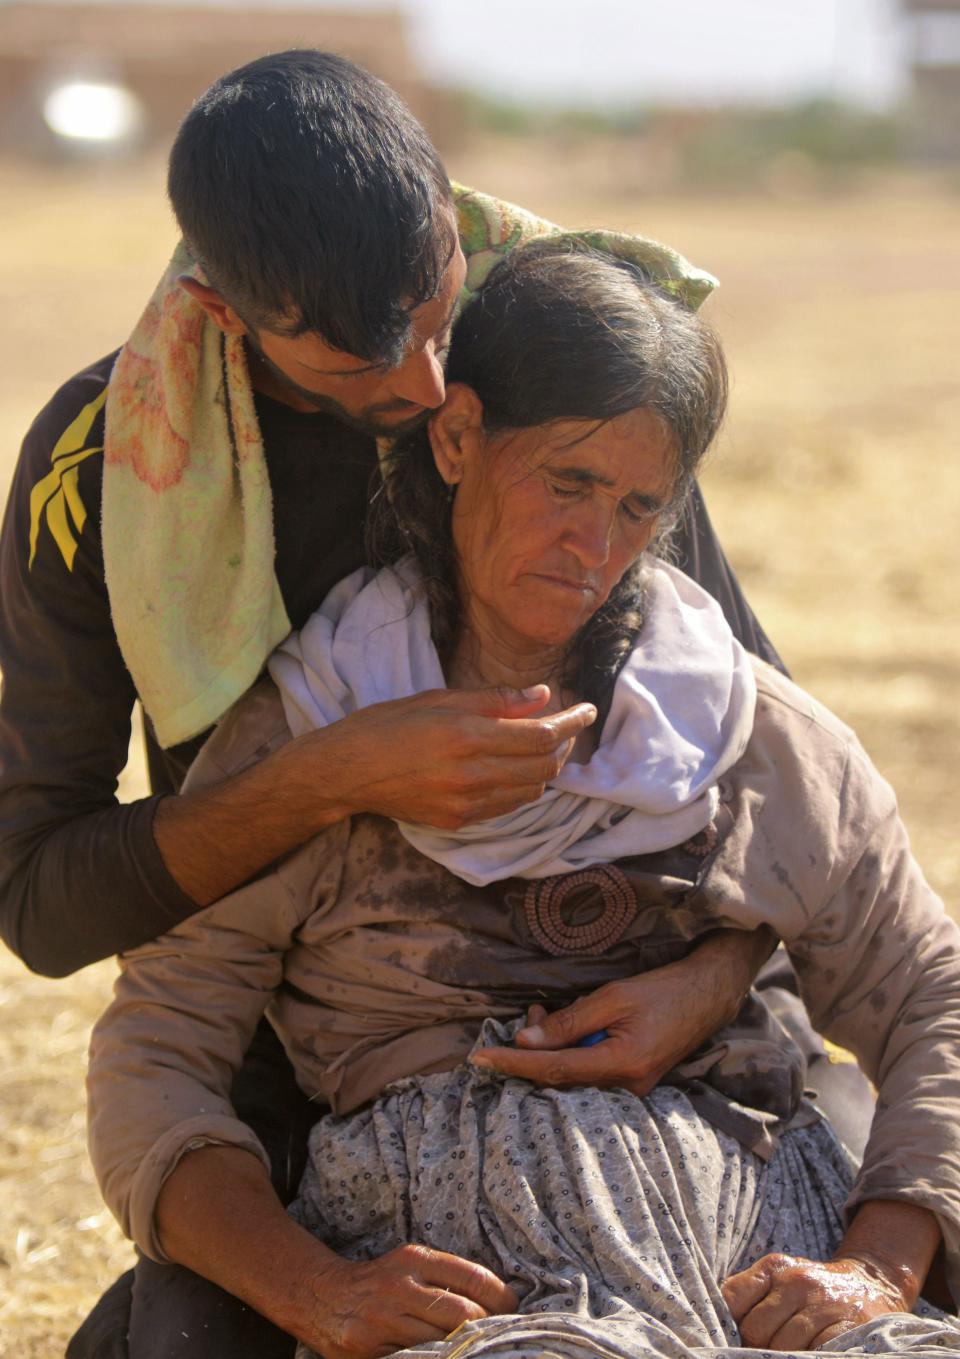 A displaced man helps a woman, both from the minority Yazidi sect fleeing violence from forces loyal to the Islamic State in Sinjar town, as they make their way towards the Syrian border, on the outskirts of Sinjar mountain, near the Syrian border